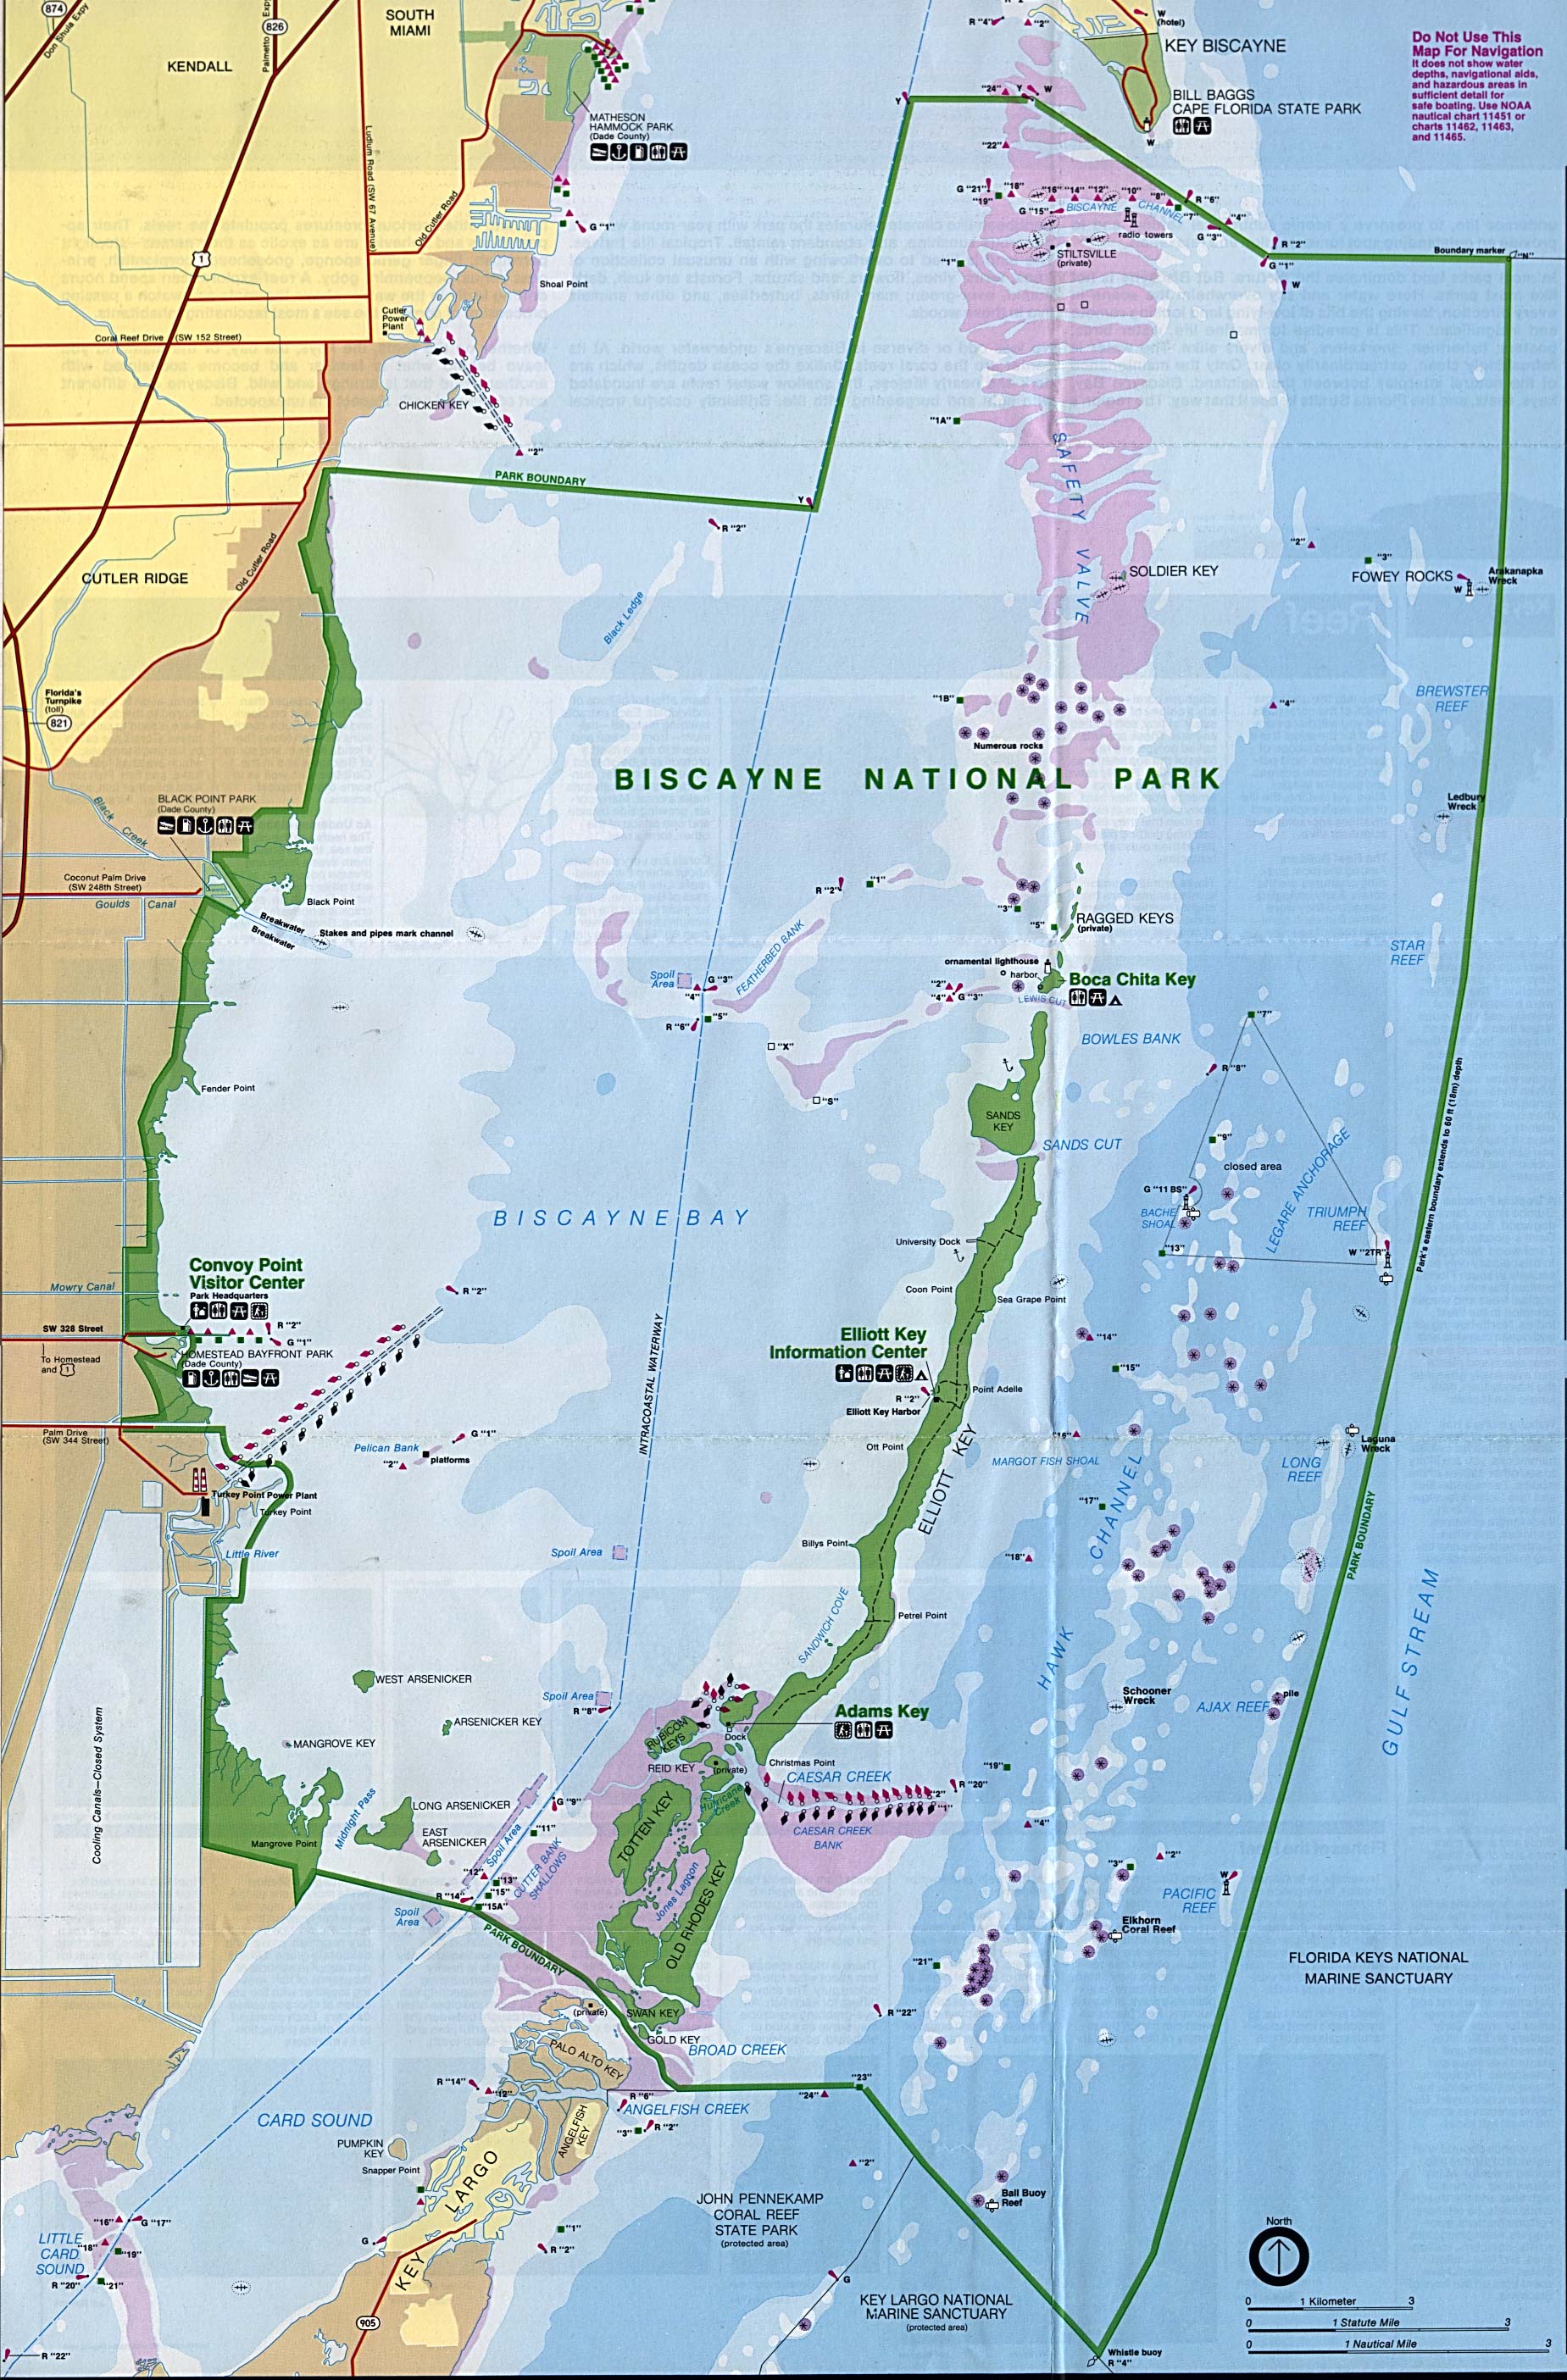  Maps of United States National Parks, Monuments and Historic Sites Biscayne National Park [Florida] (Park Map) 1995 (762K) 